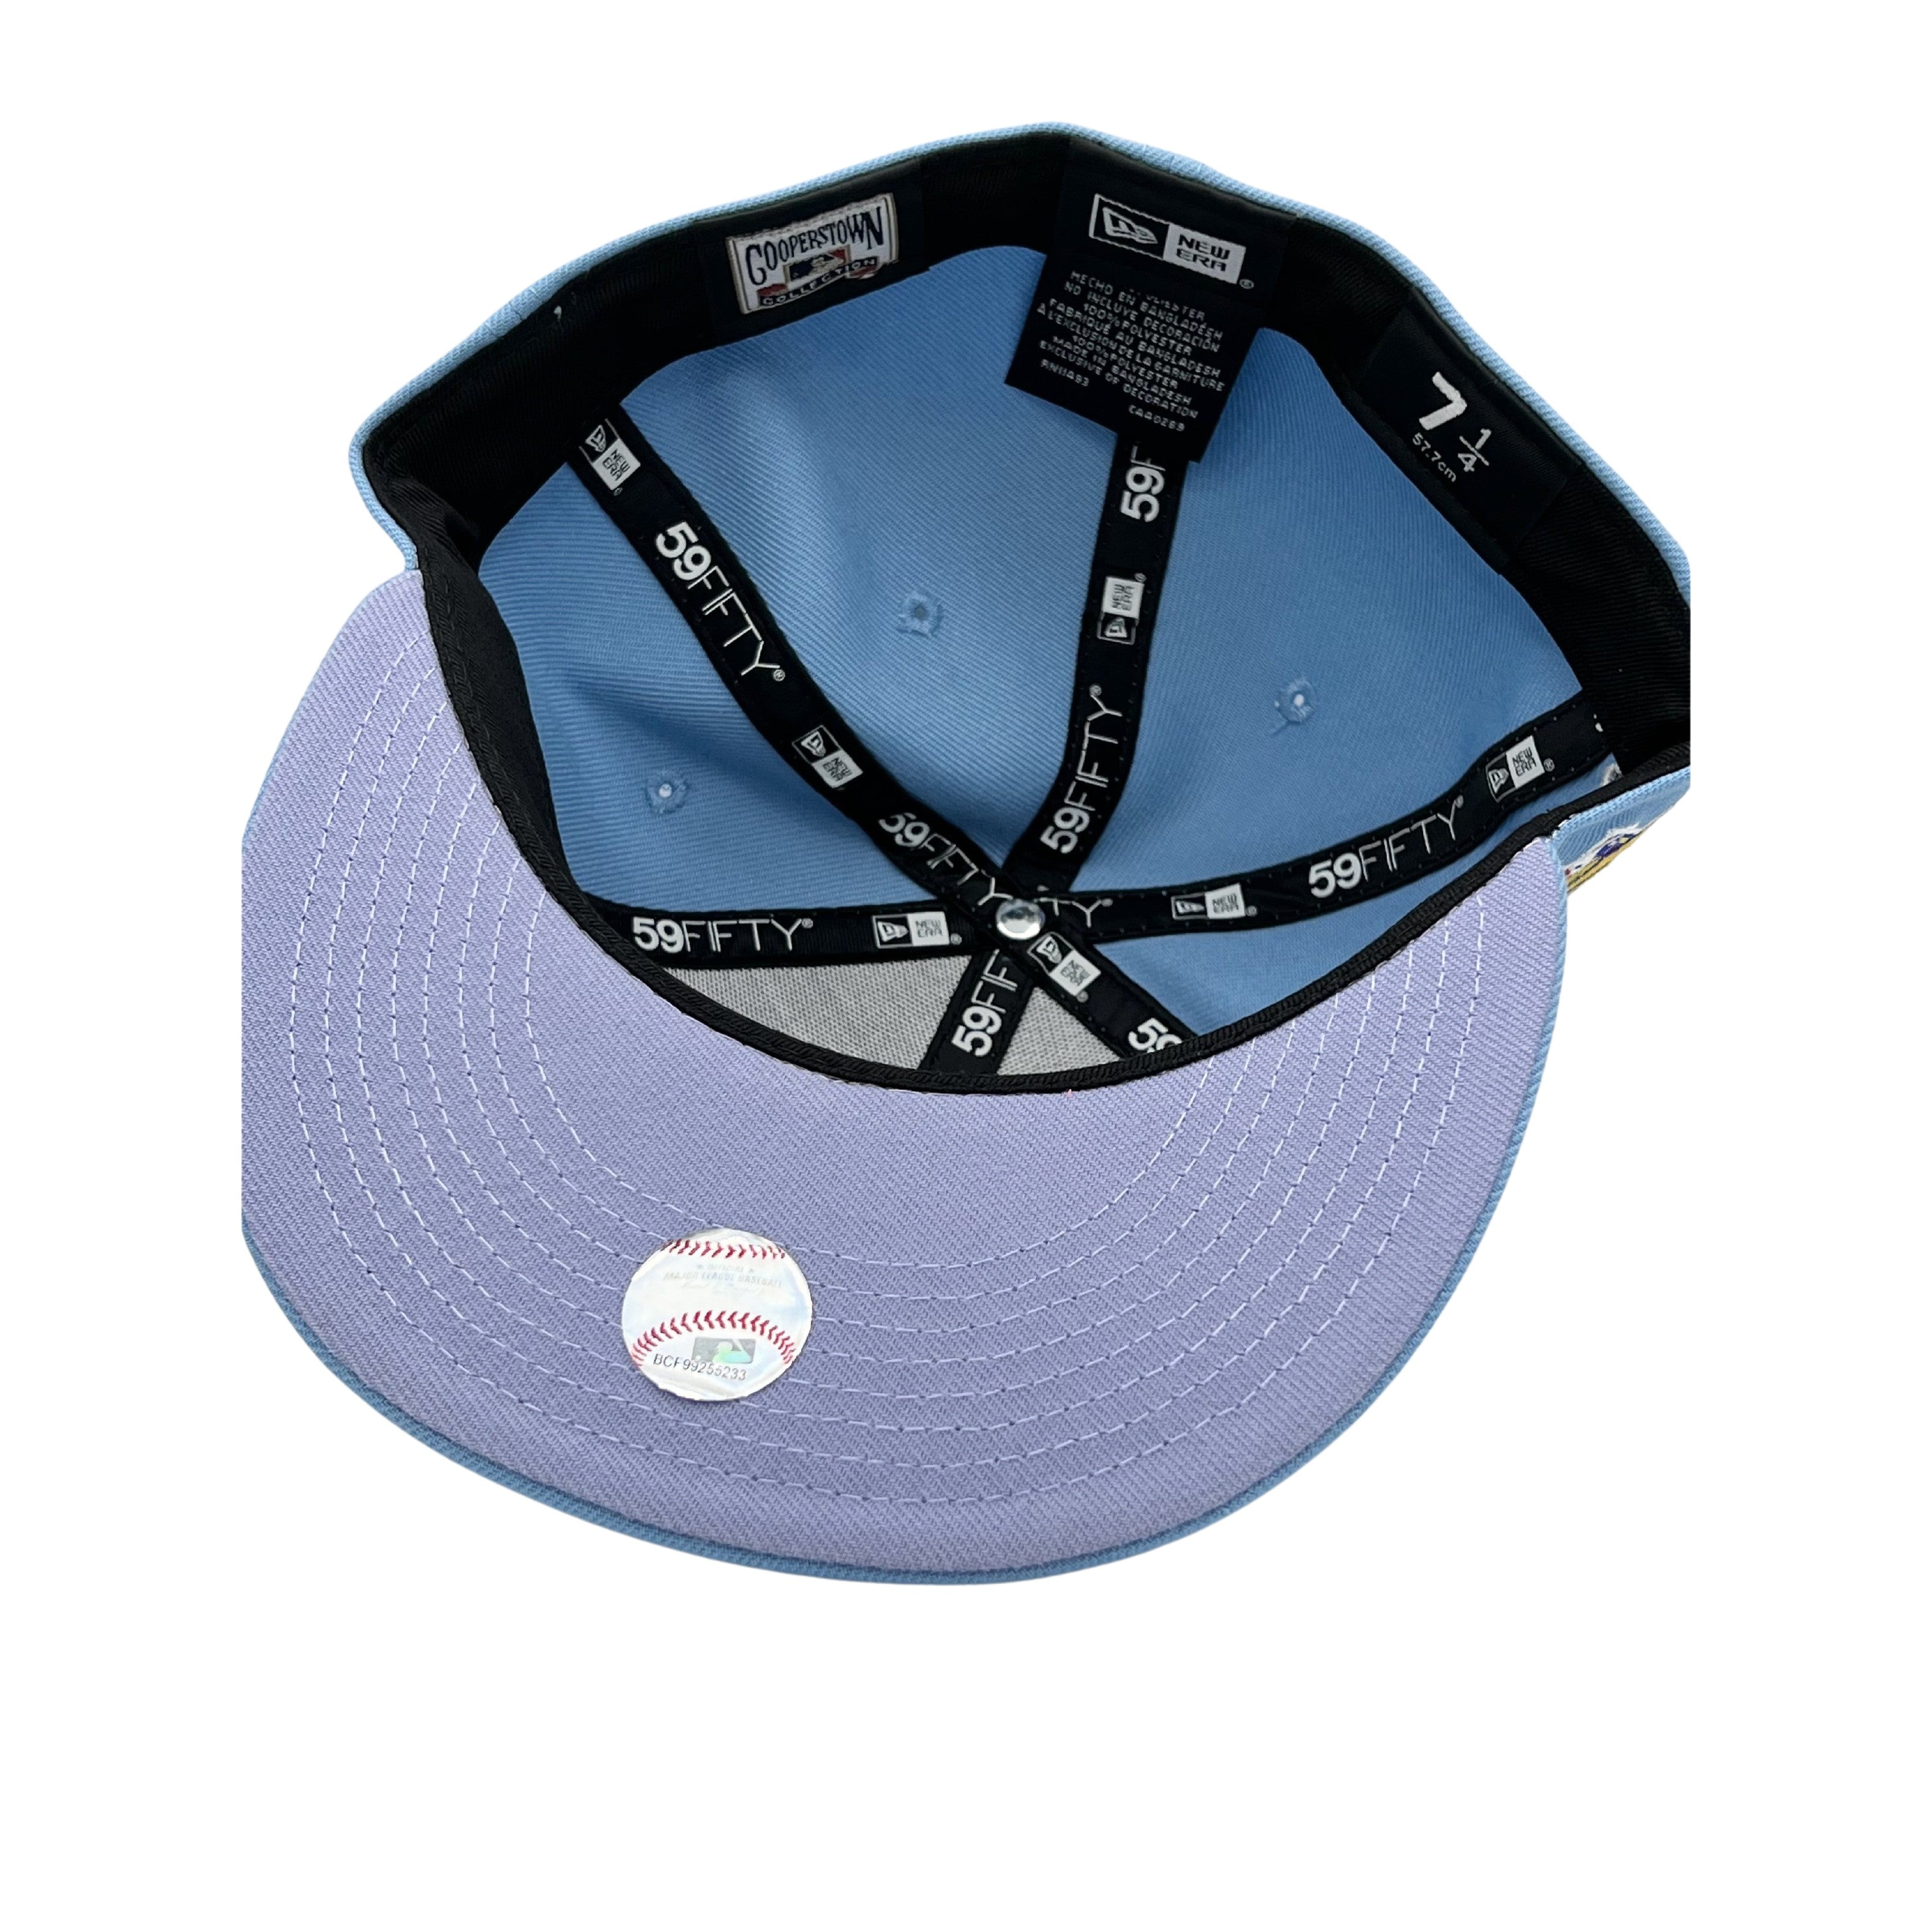 New Era Tigers 59Fifty Blooming Floral Fitted Caps